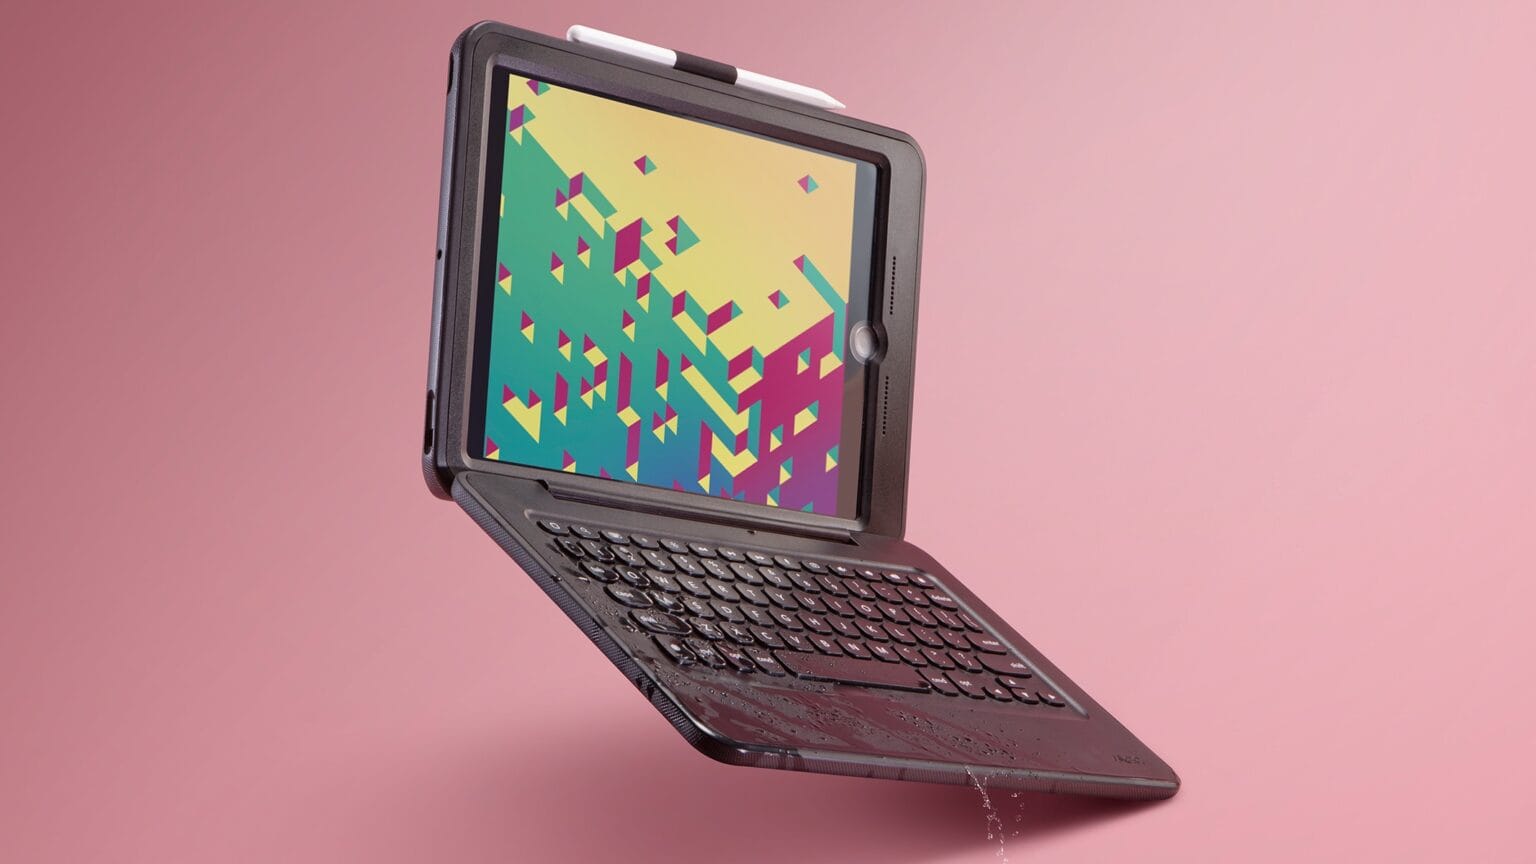 Wrap iPad in 6 feet of drop protection with new Zagg keyboard case